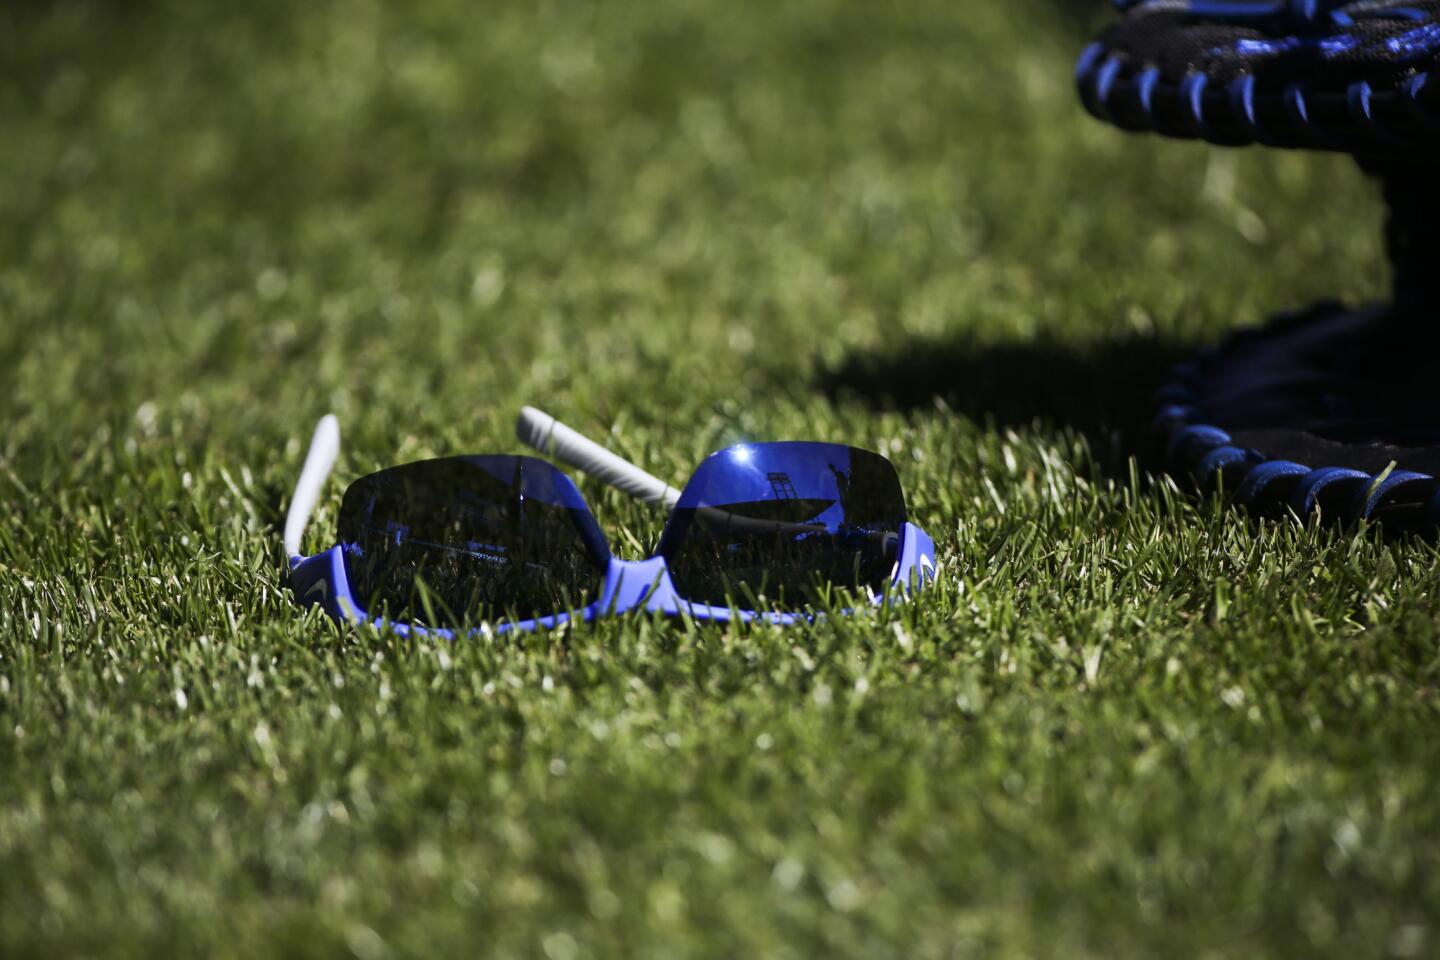 Anthony Rizzo's glasses sit on the grass during practice at Sloan Park on Sunday, Feb. 28, 2016, in Mesa, Ariz.